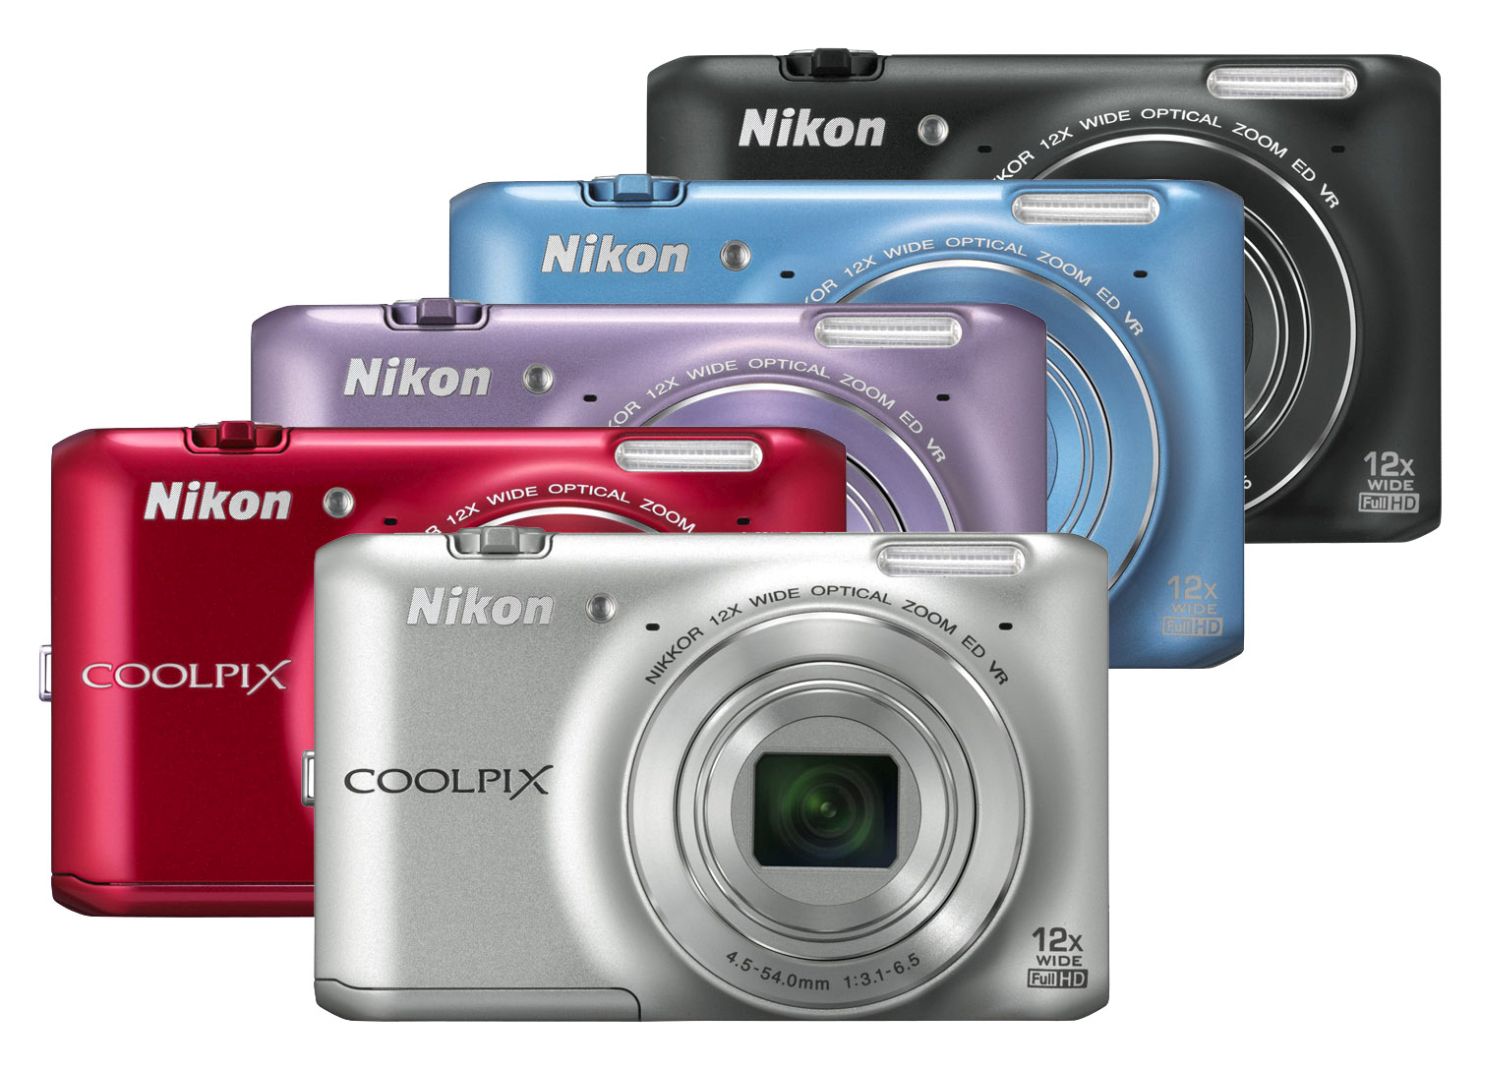 Profeet Land zweep Nikon Outs Firmware 1.2 for COOLPIX S6400 Cameras – Download Now